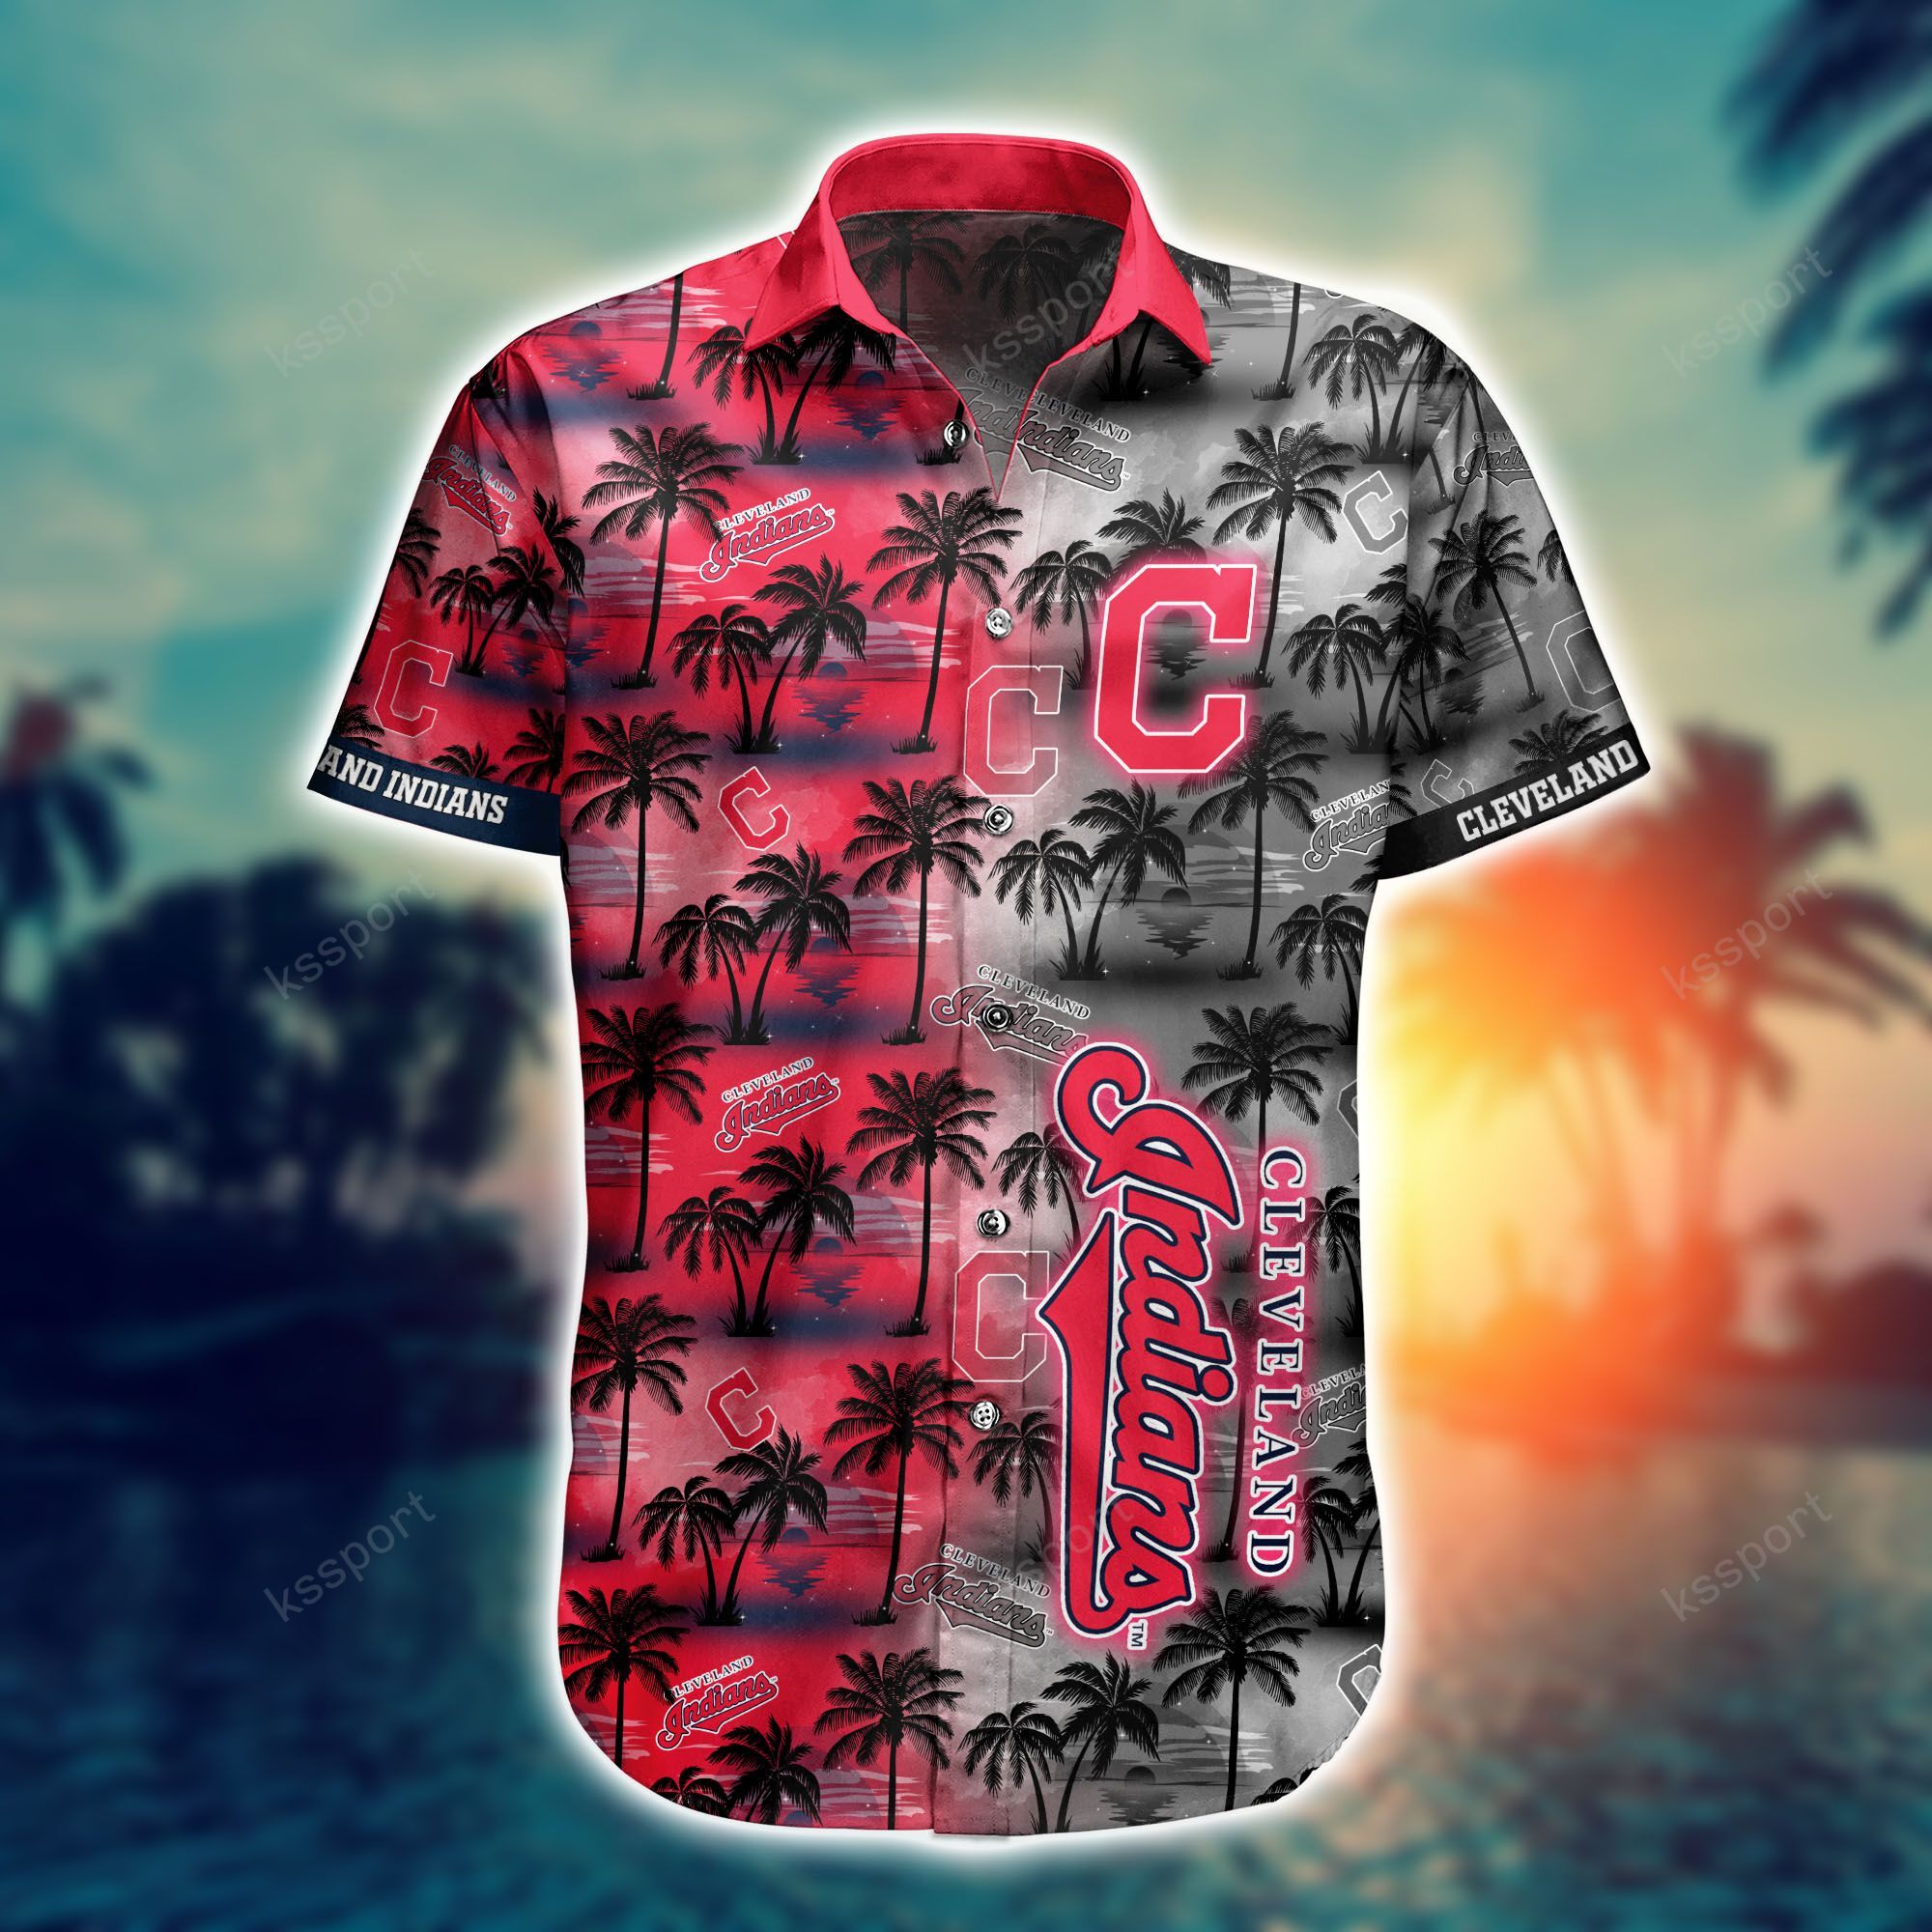 Top cool Hawaiian shirt 2022 - Make sure you get yours today before they run out! 233